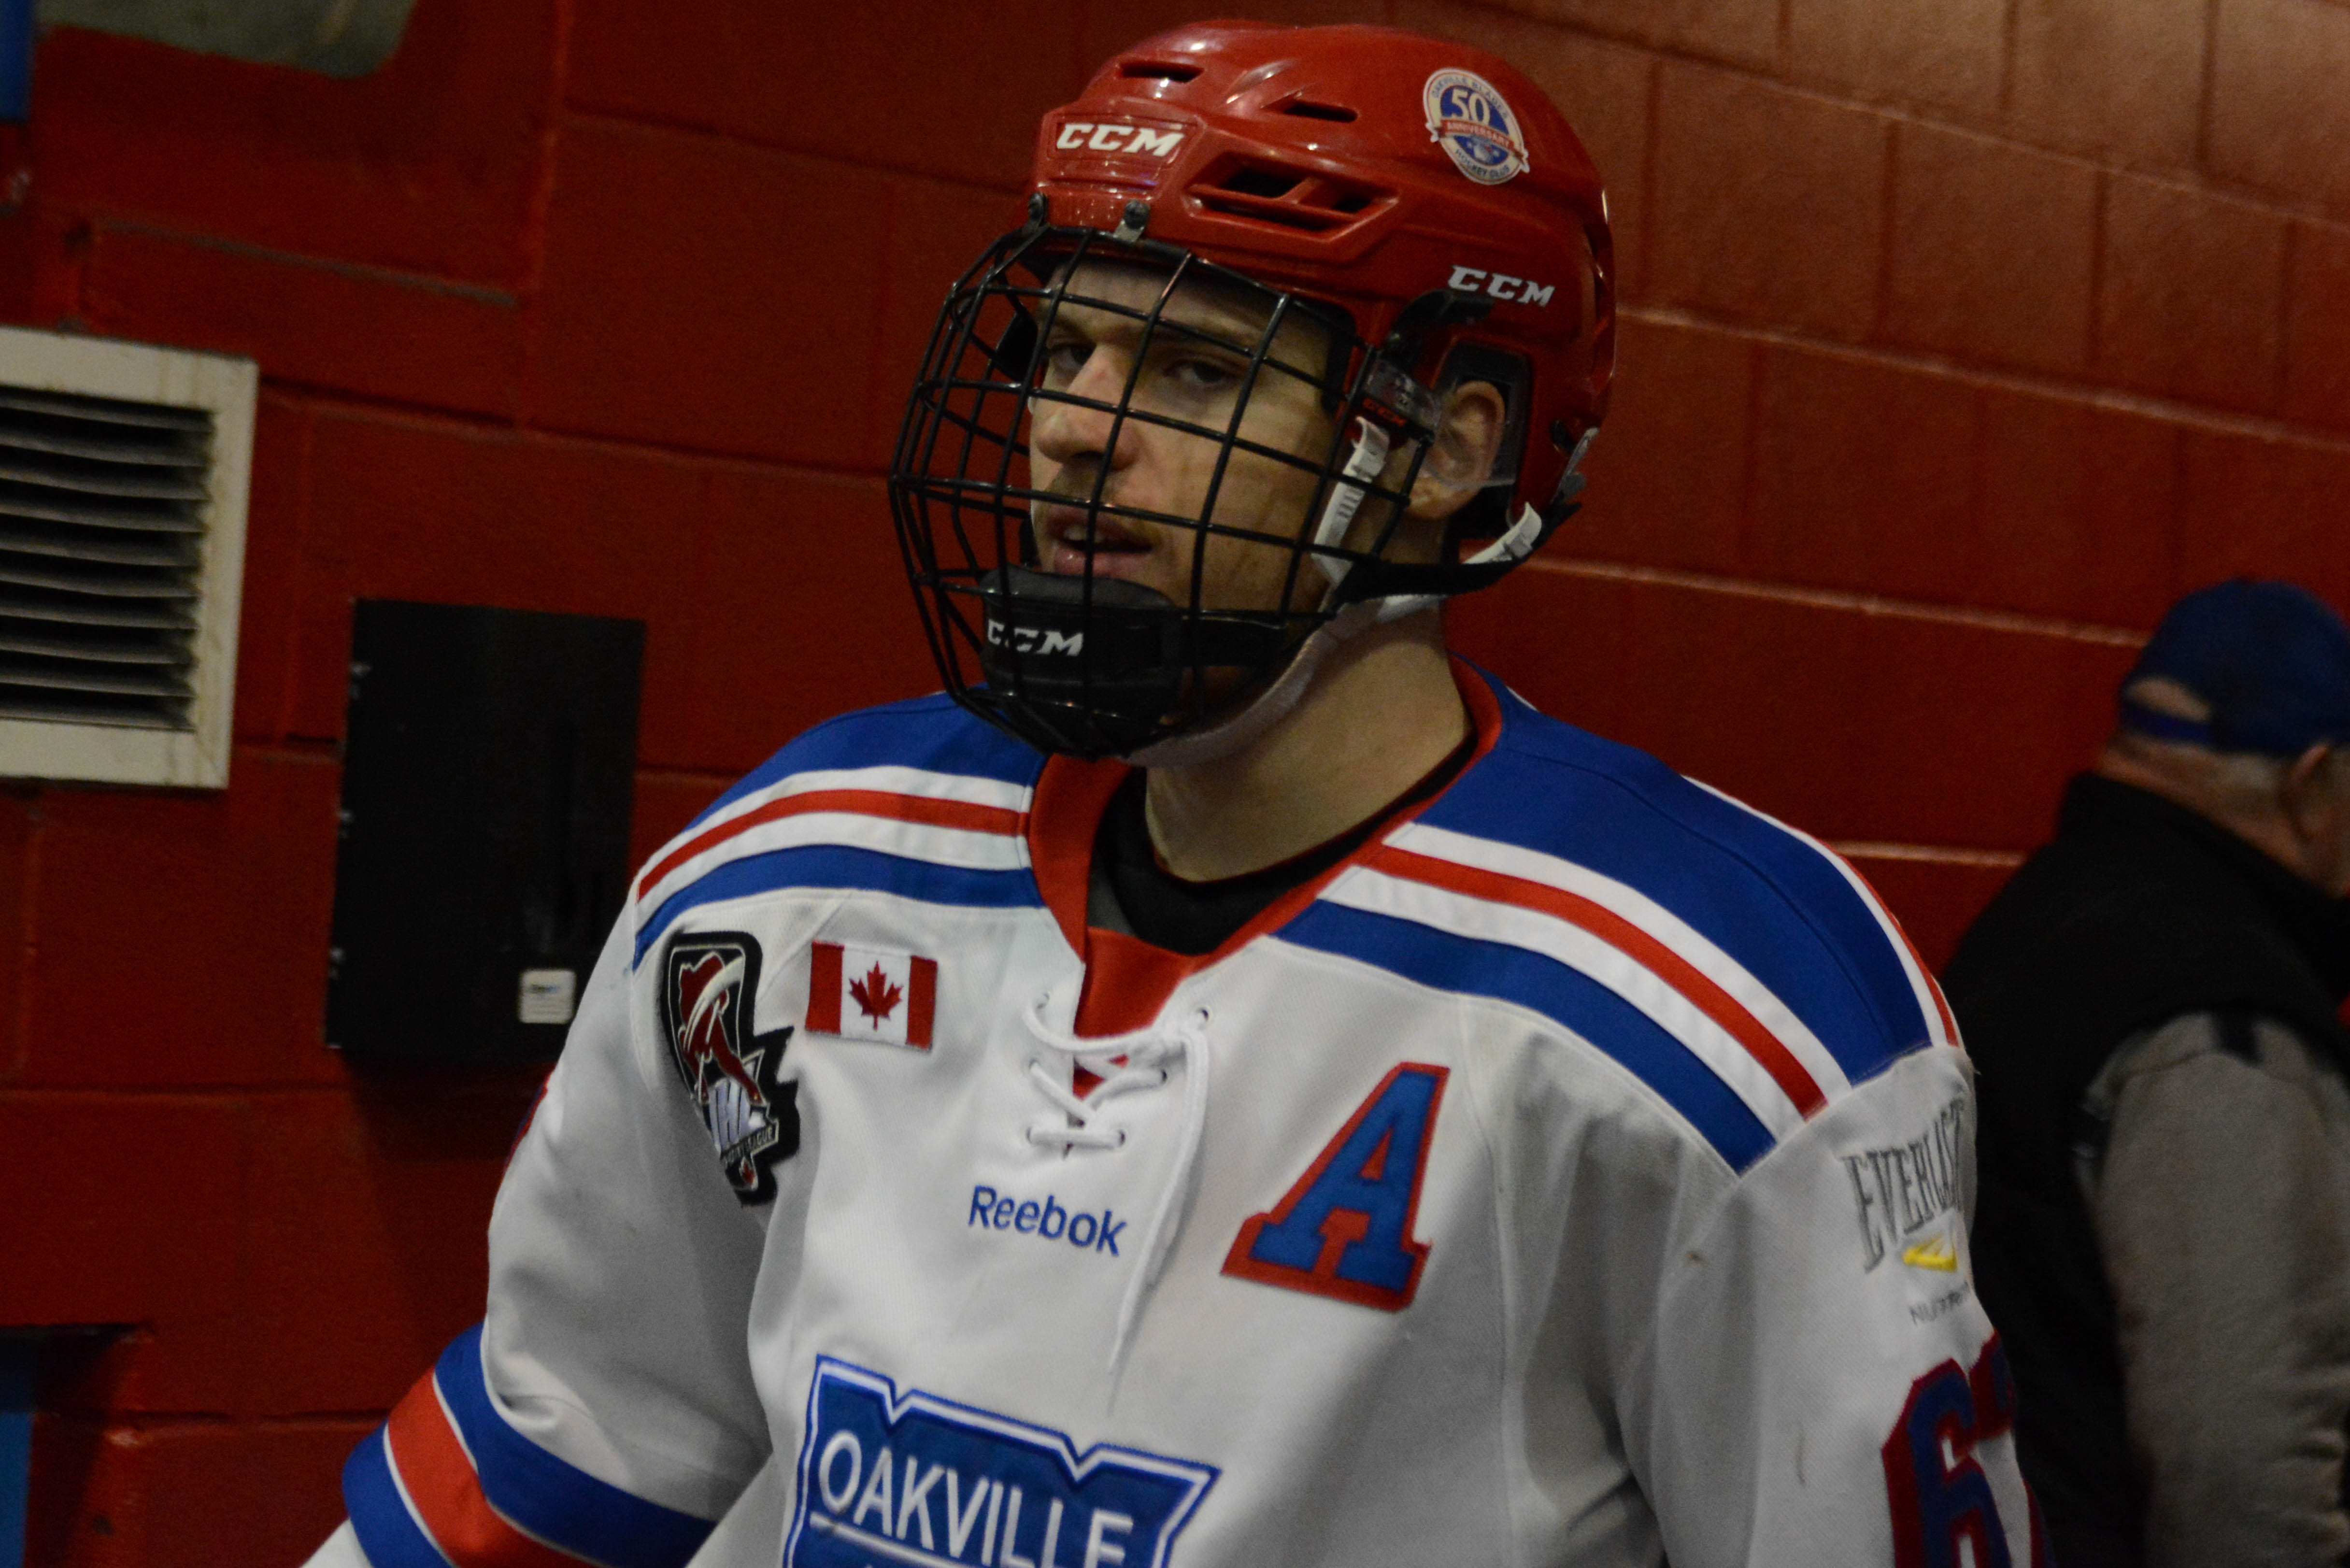 Drew Worrad gets ready to skate on the ice for warmup before Oakville